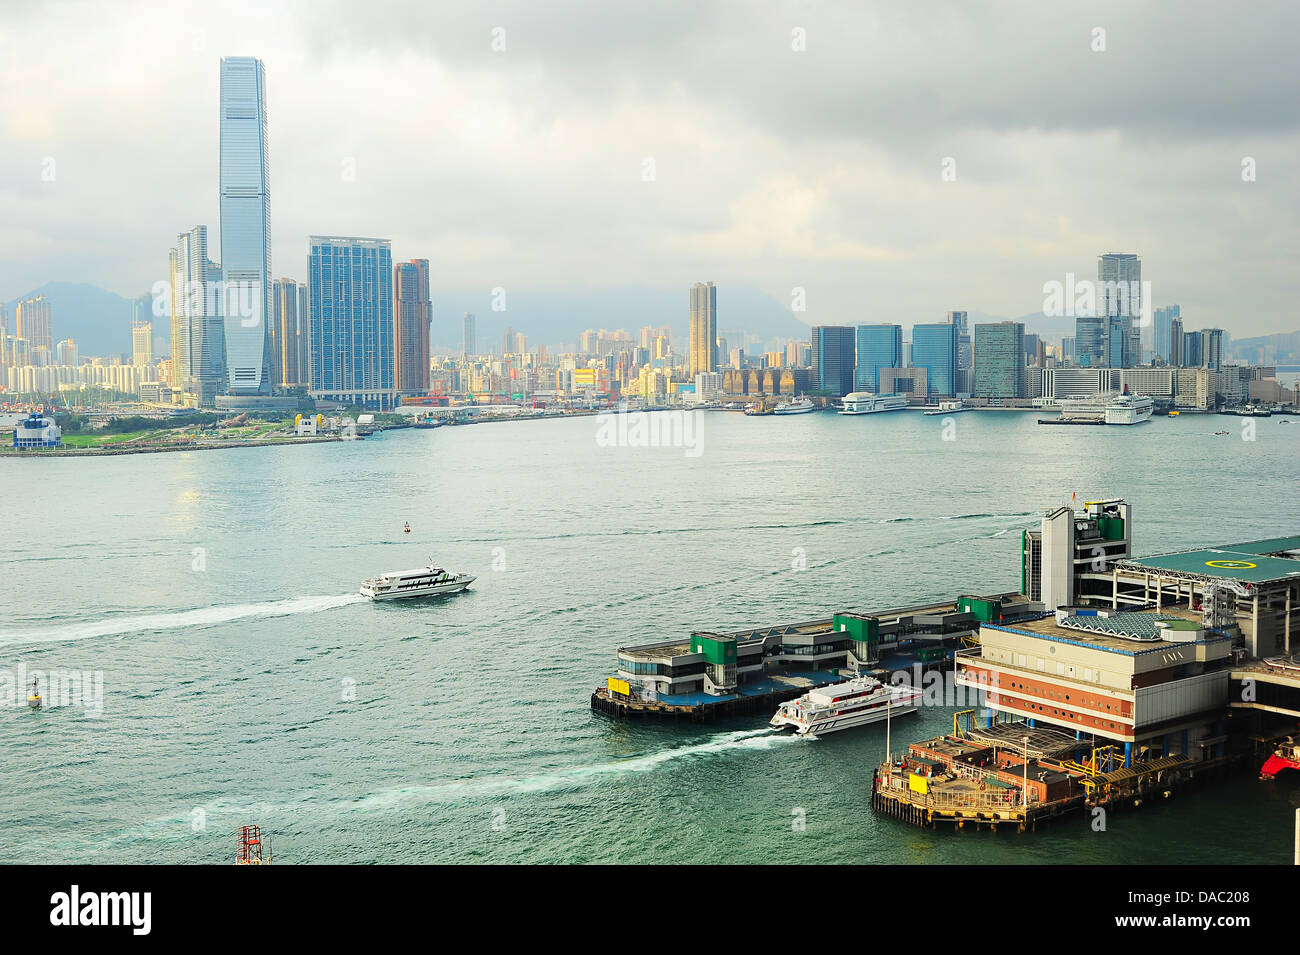 Kowloon island at sunset. Ferry pier from Hong Kong to Macao on the right. Stock Photo